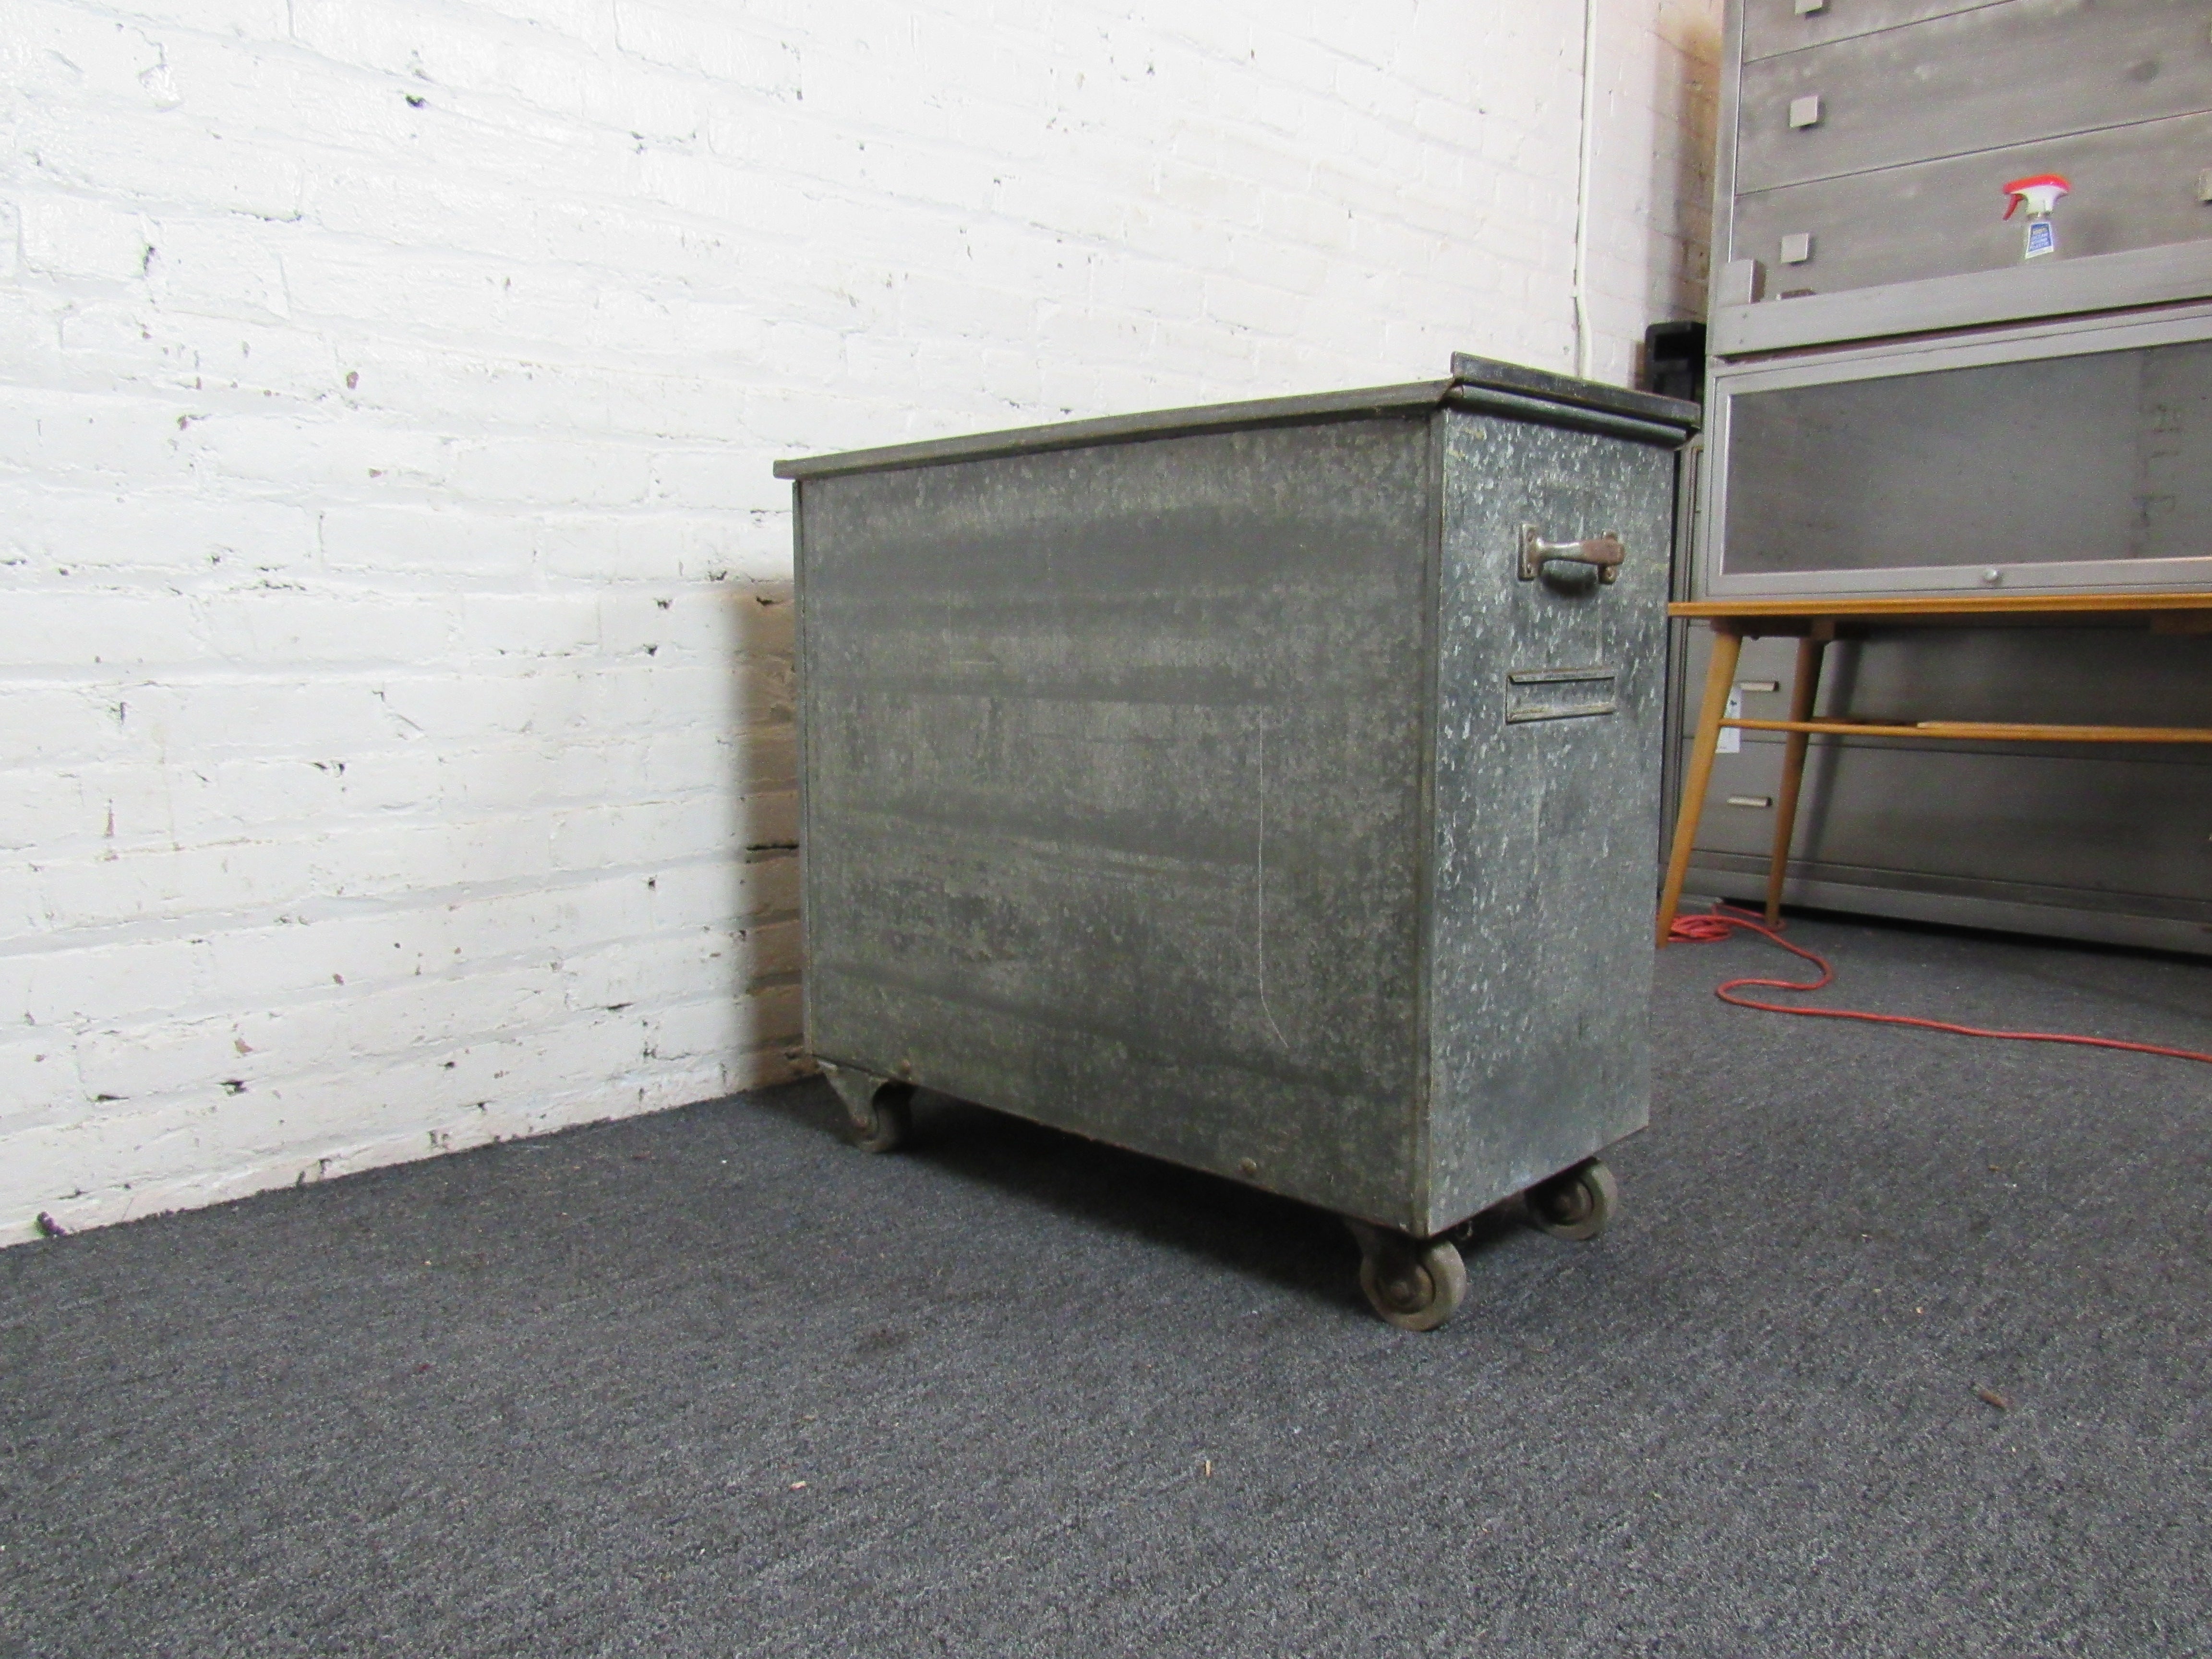 Industrial galvanized tin rolling box made by Wilder. Sliding top reveals a large storage space. Perfect for use in a workshop, or in the home as a unique end table. Please confirm item location with seller (NY/NJ).